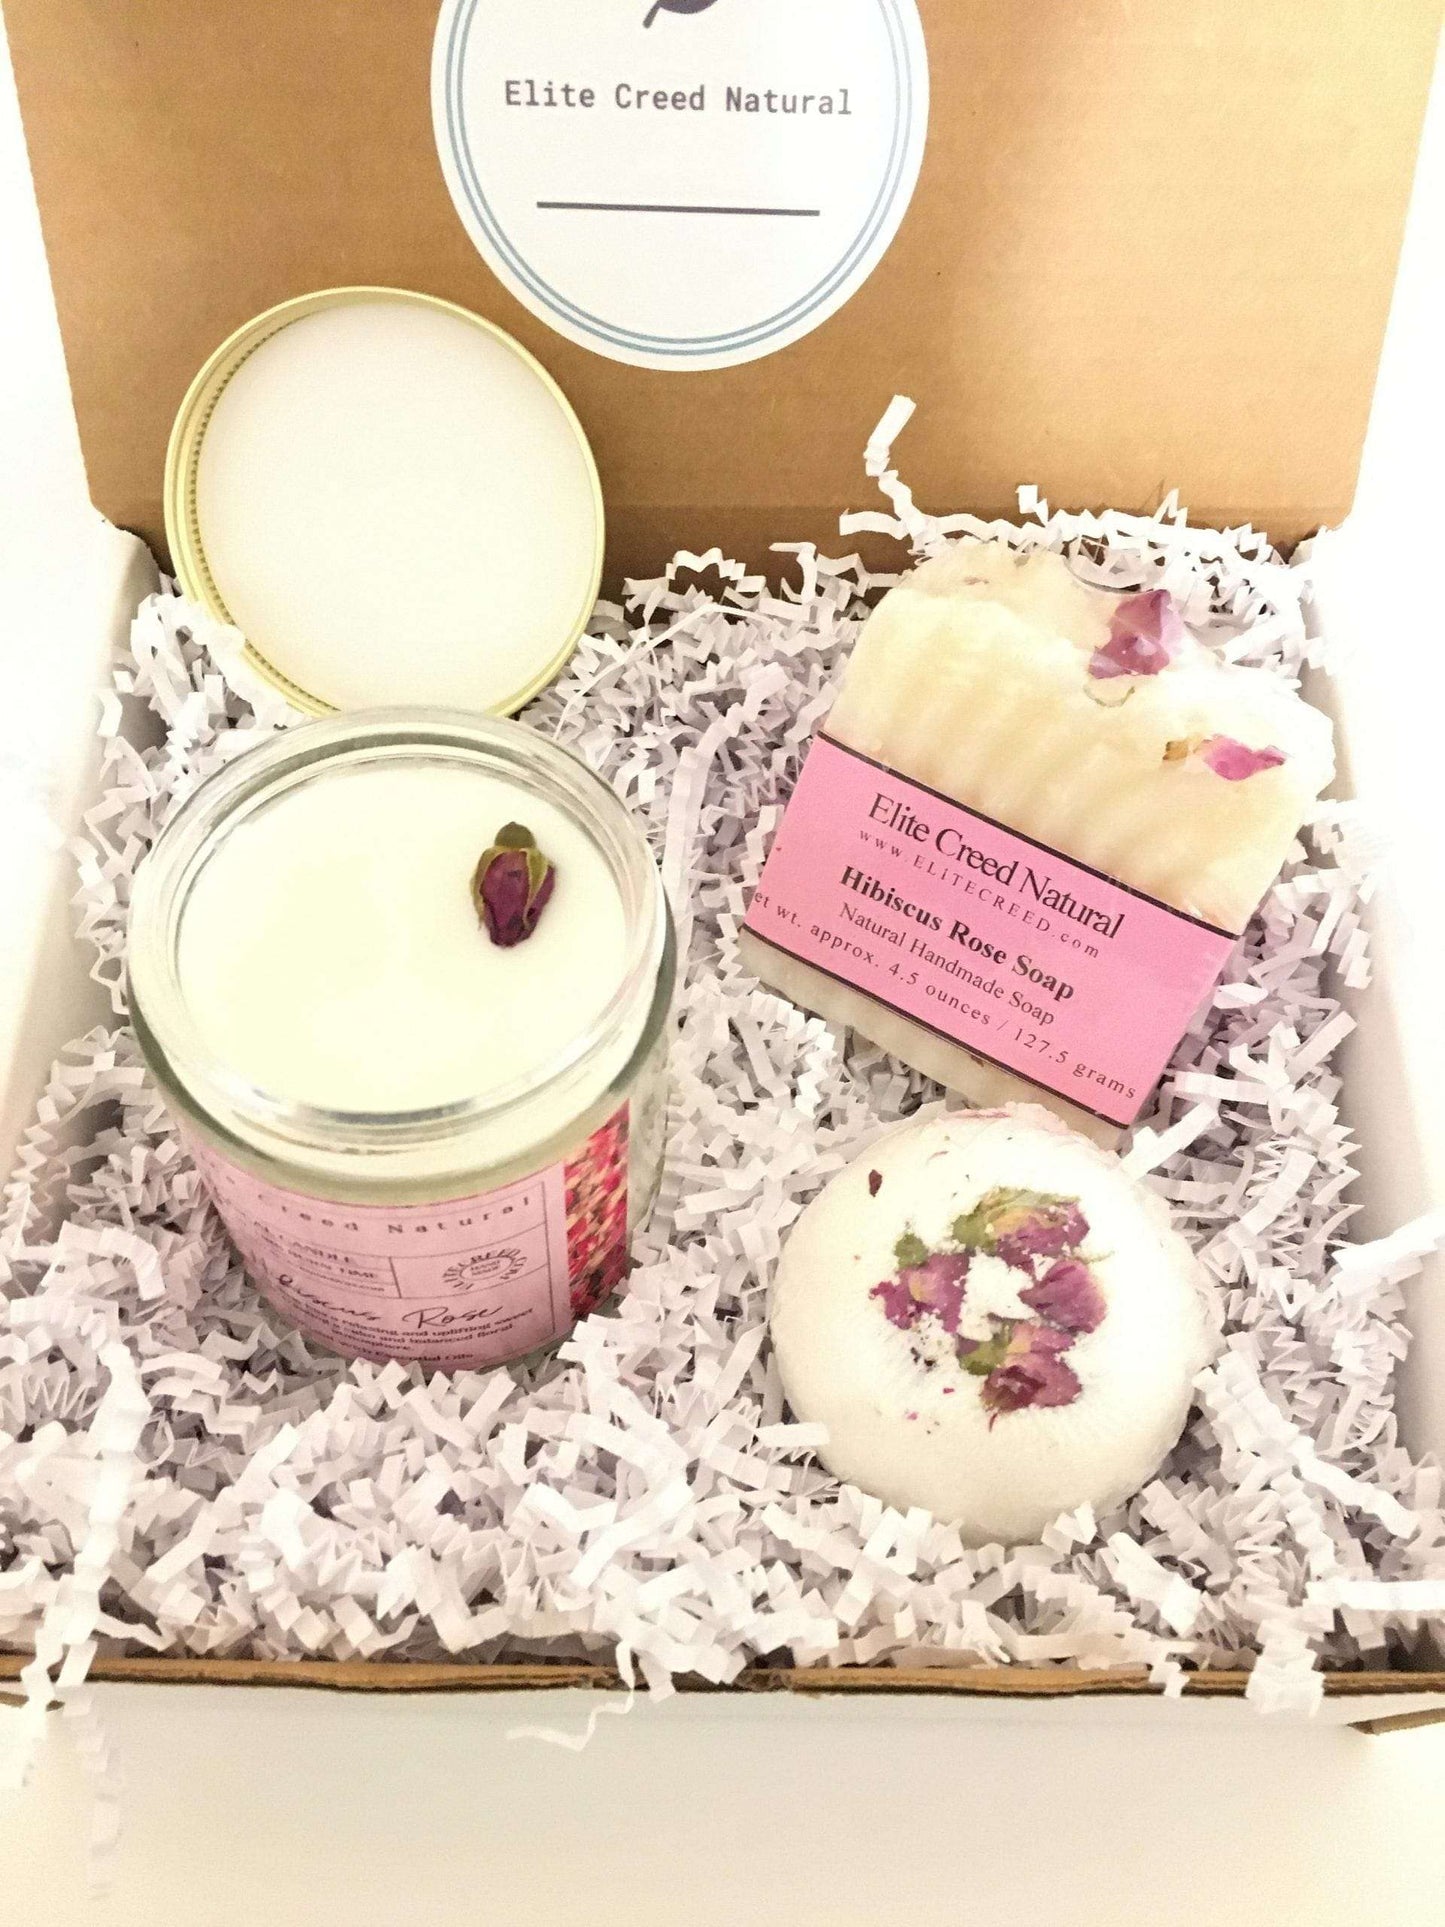 Hibiscus Rose Candle Gift Set Elite Creed Natural